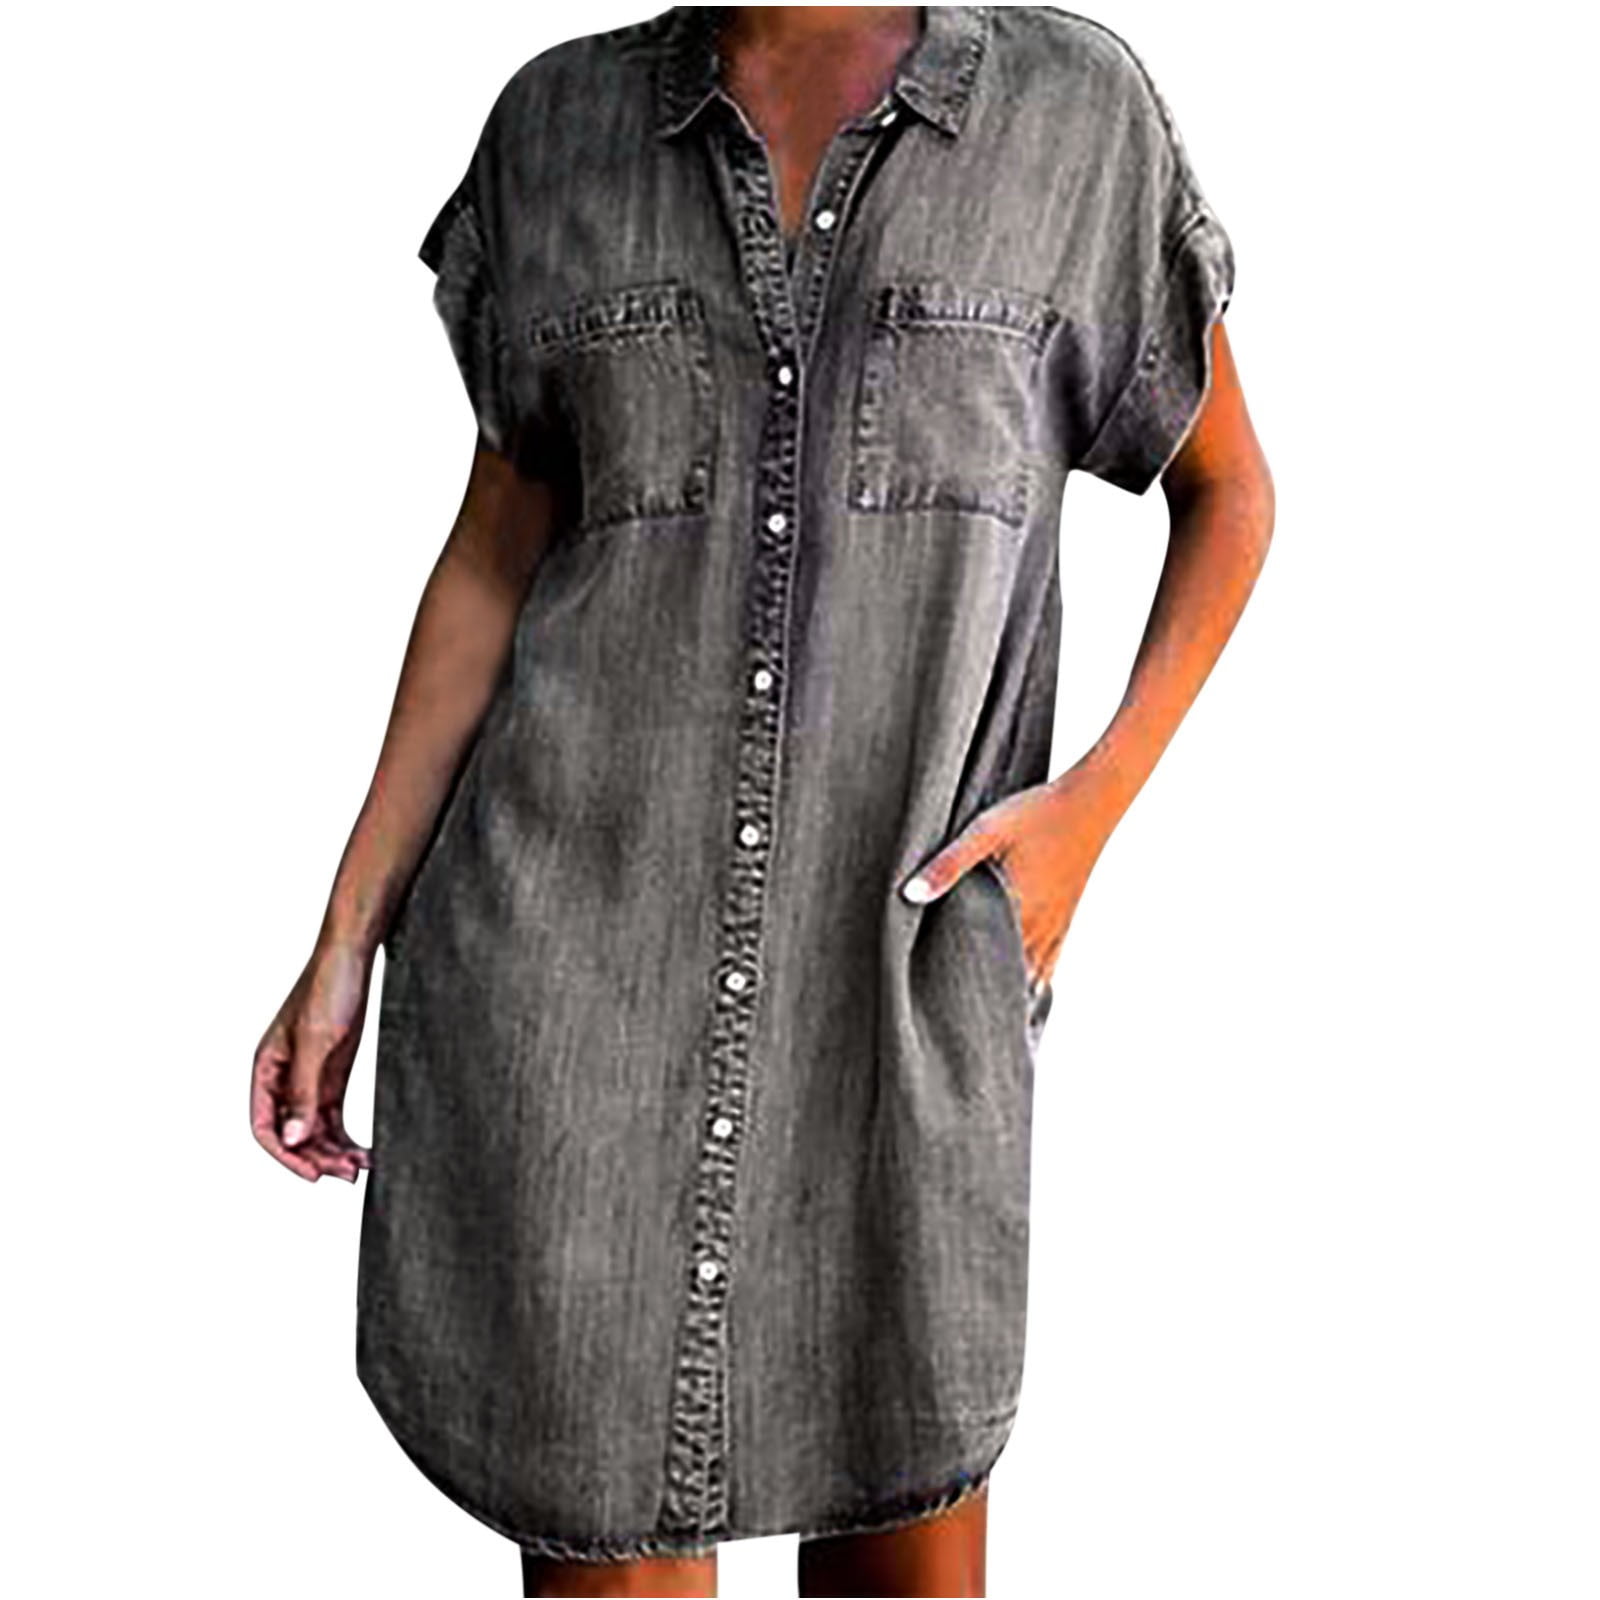 How to Style a Denim Shirt Dress for Women over 70